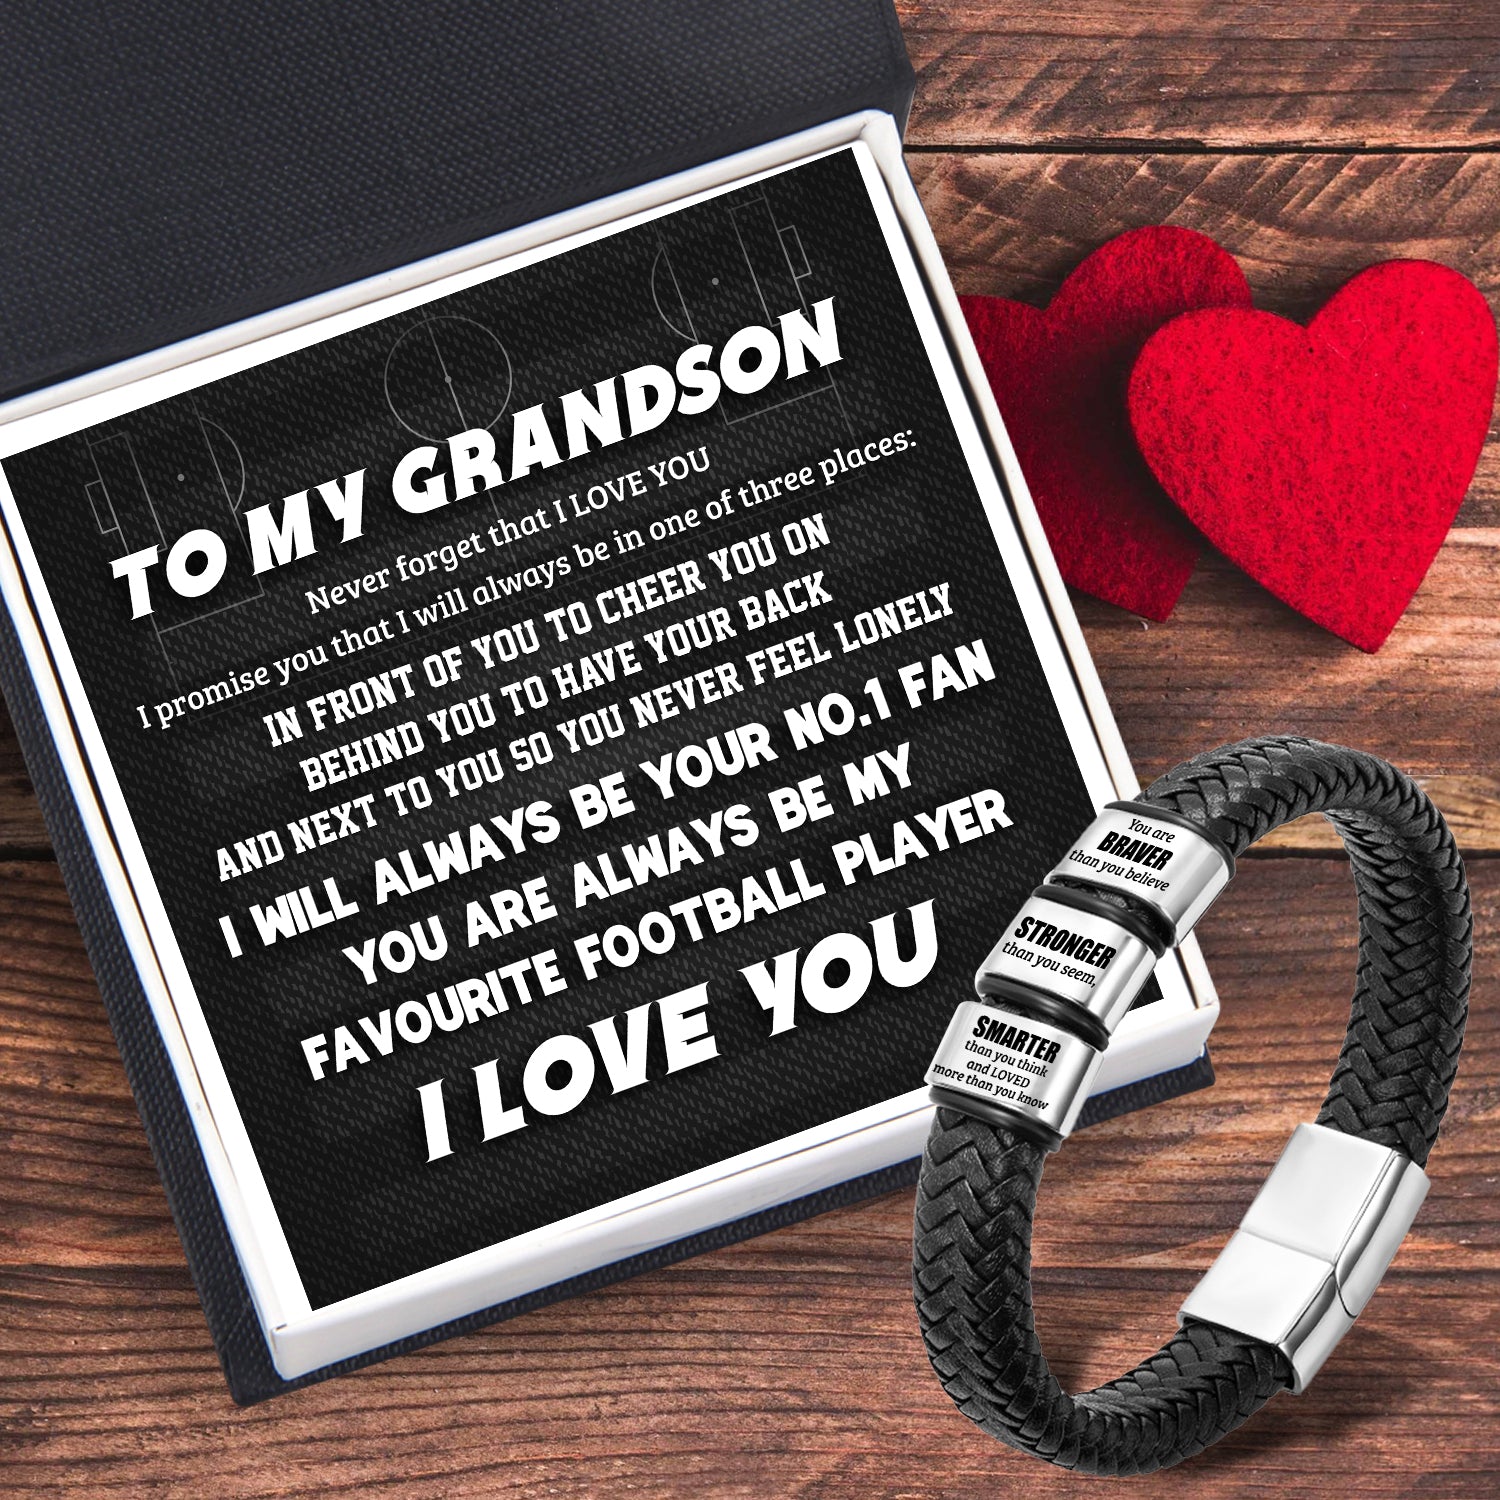 Leather Bracelet - Football - To My Grandson - Never Forget That I Love You - Ukgbzl22011